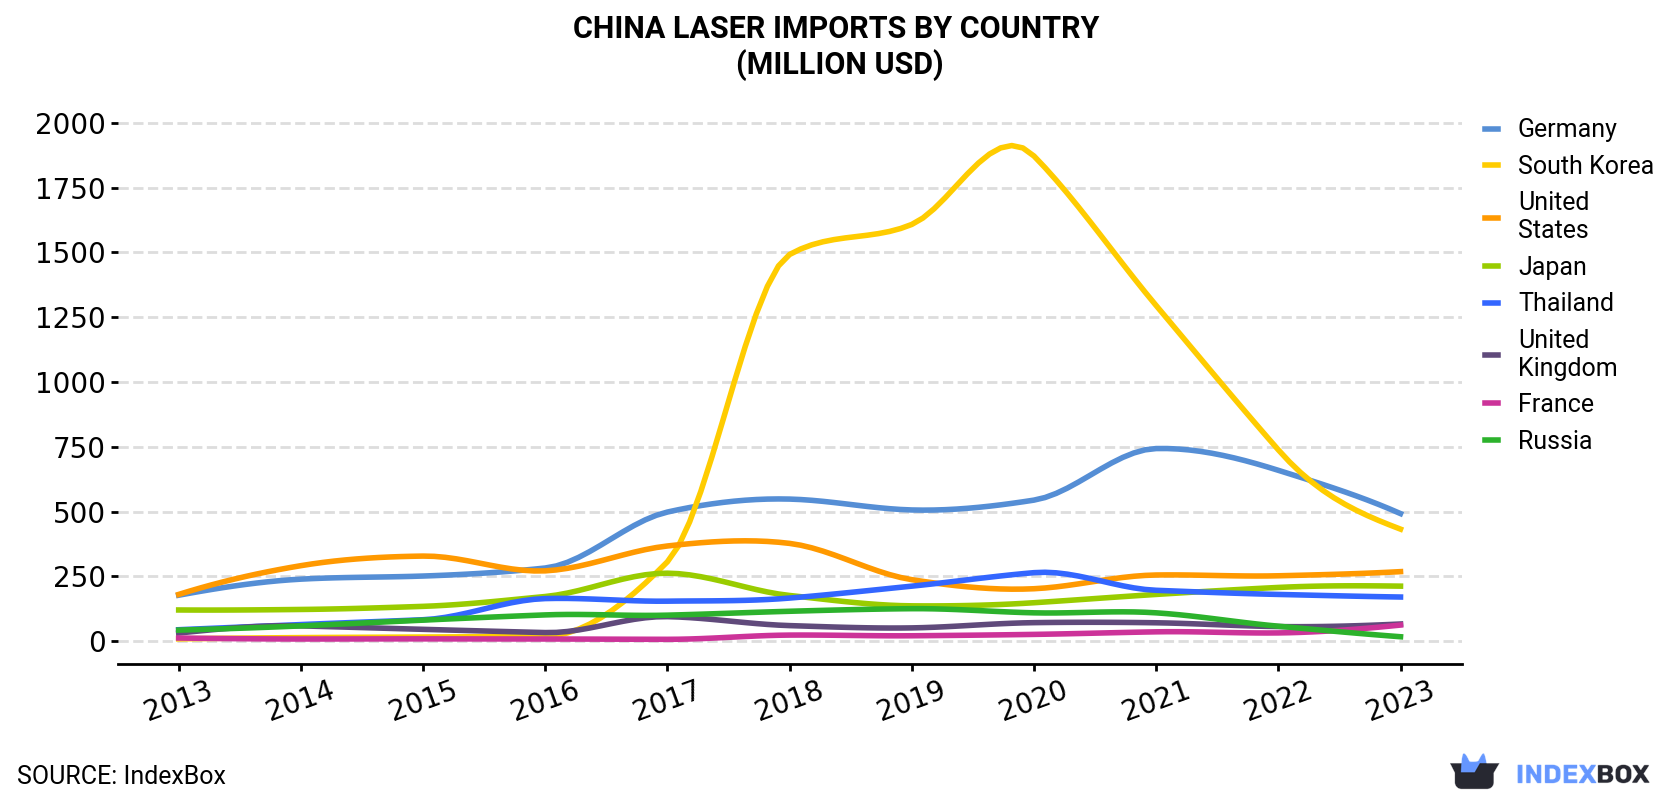 China Laser Imports By Country (Million USD)